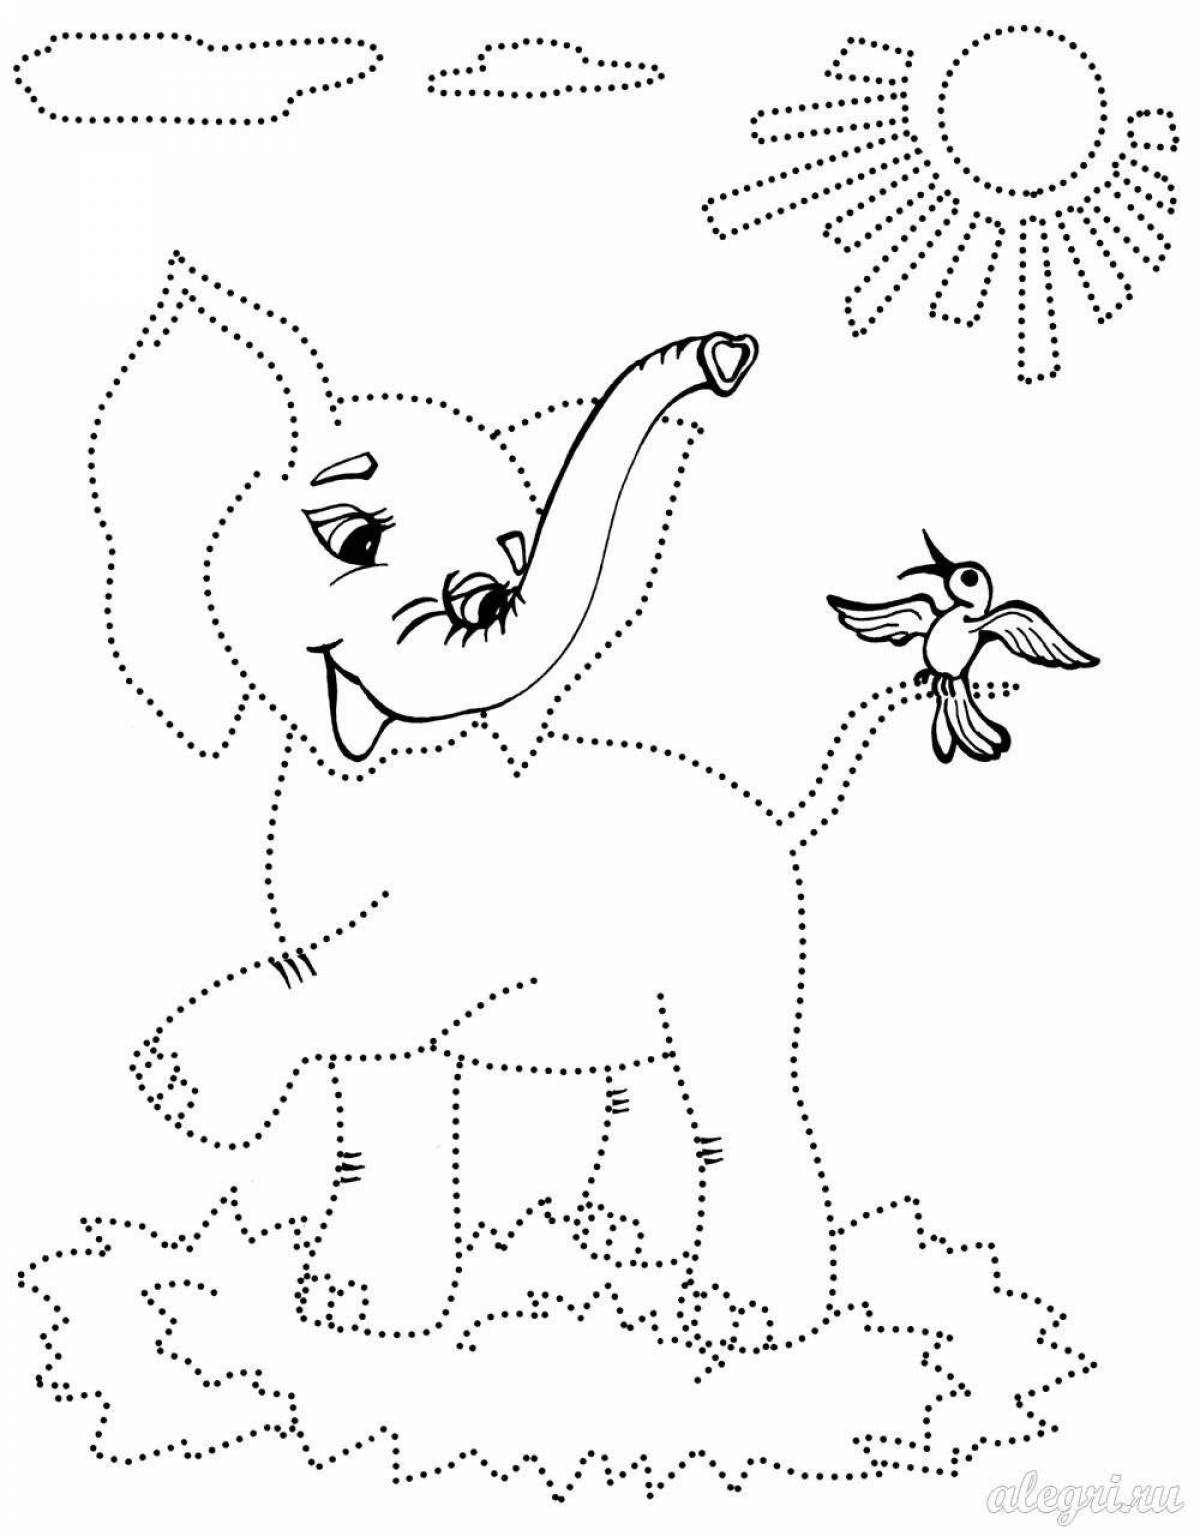 Fun coloring with dots for the little ones